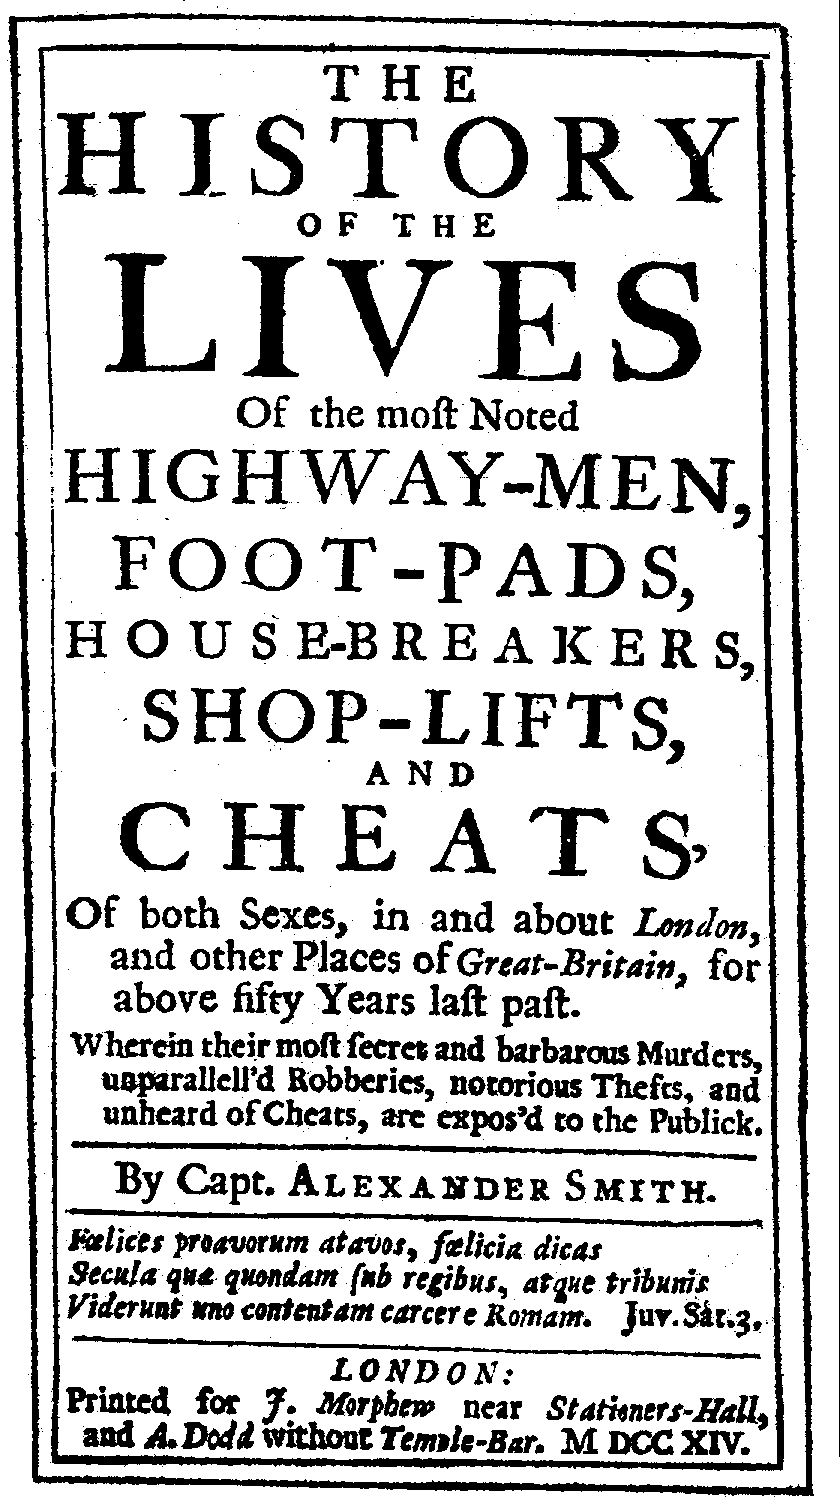 Captain Alexander Smith [pseud.], The History of the Most Noted Highway-Men (London: J. Morphew/ A. Dodd, 1714).